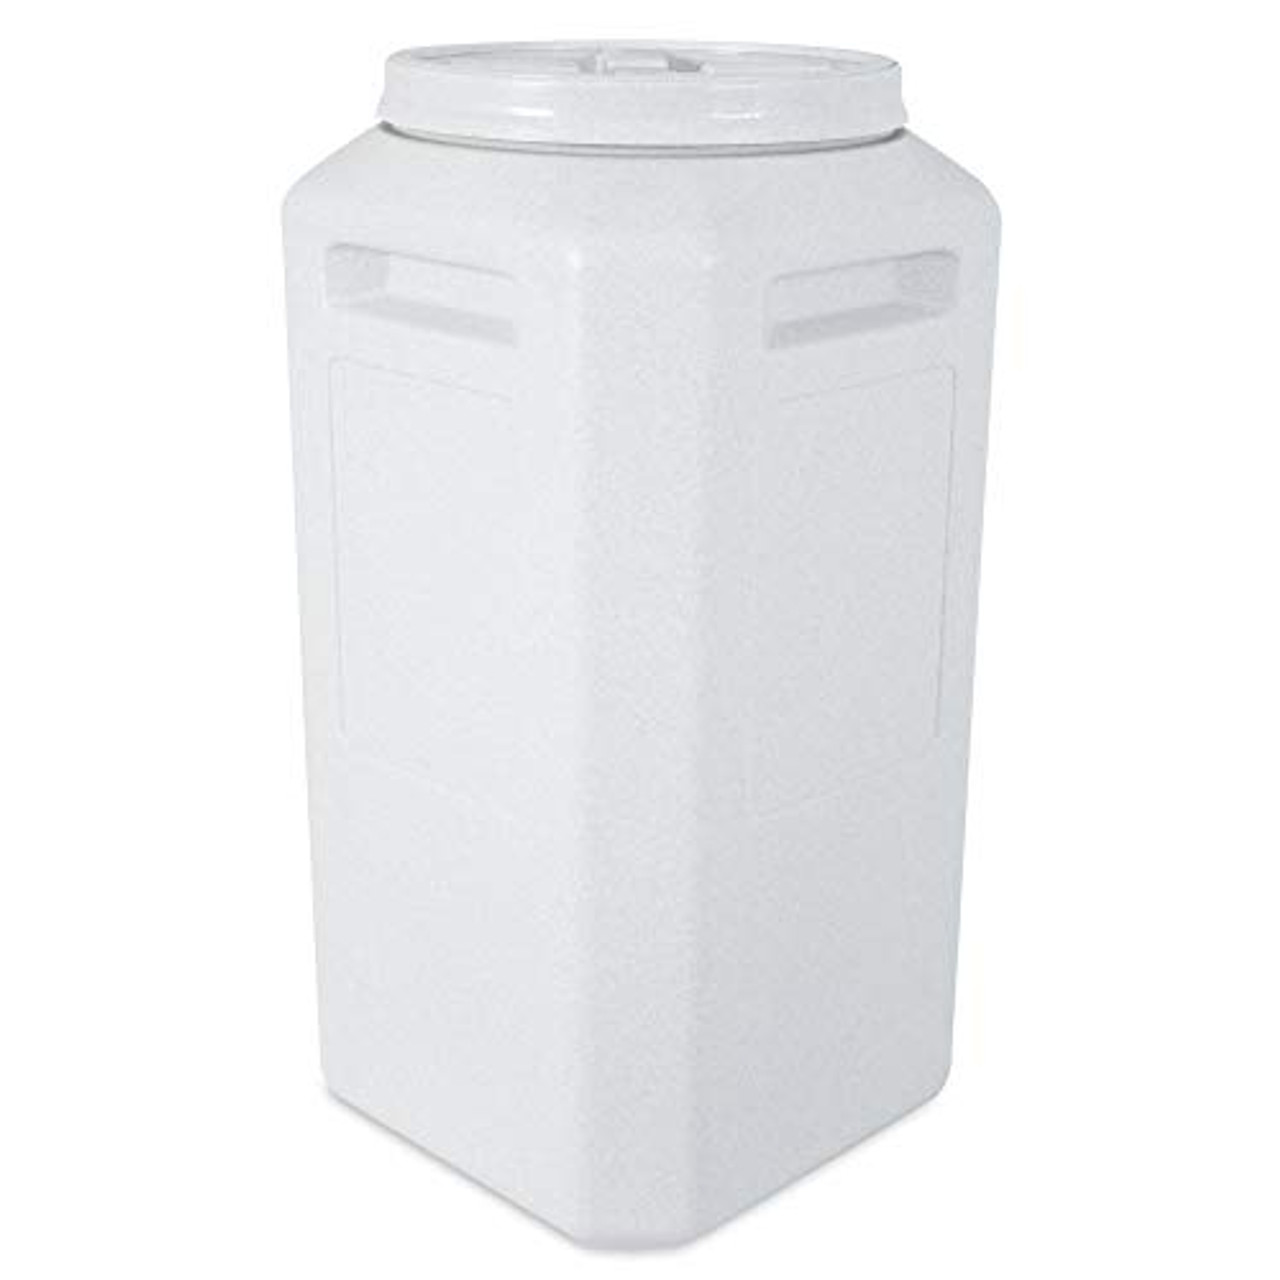 Pet Supplies : Gamma2 Vittles Vault Stackable Dog Food Storage Container,  Up to 40 Pounds Dry Pet Food Storage,Off-white, Made in USA : Pet Food  Storage Products 